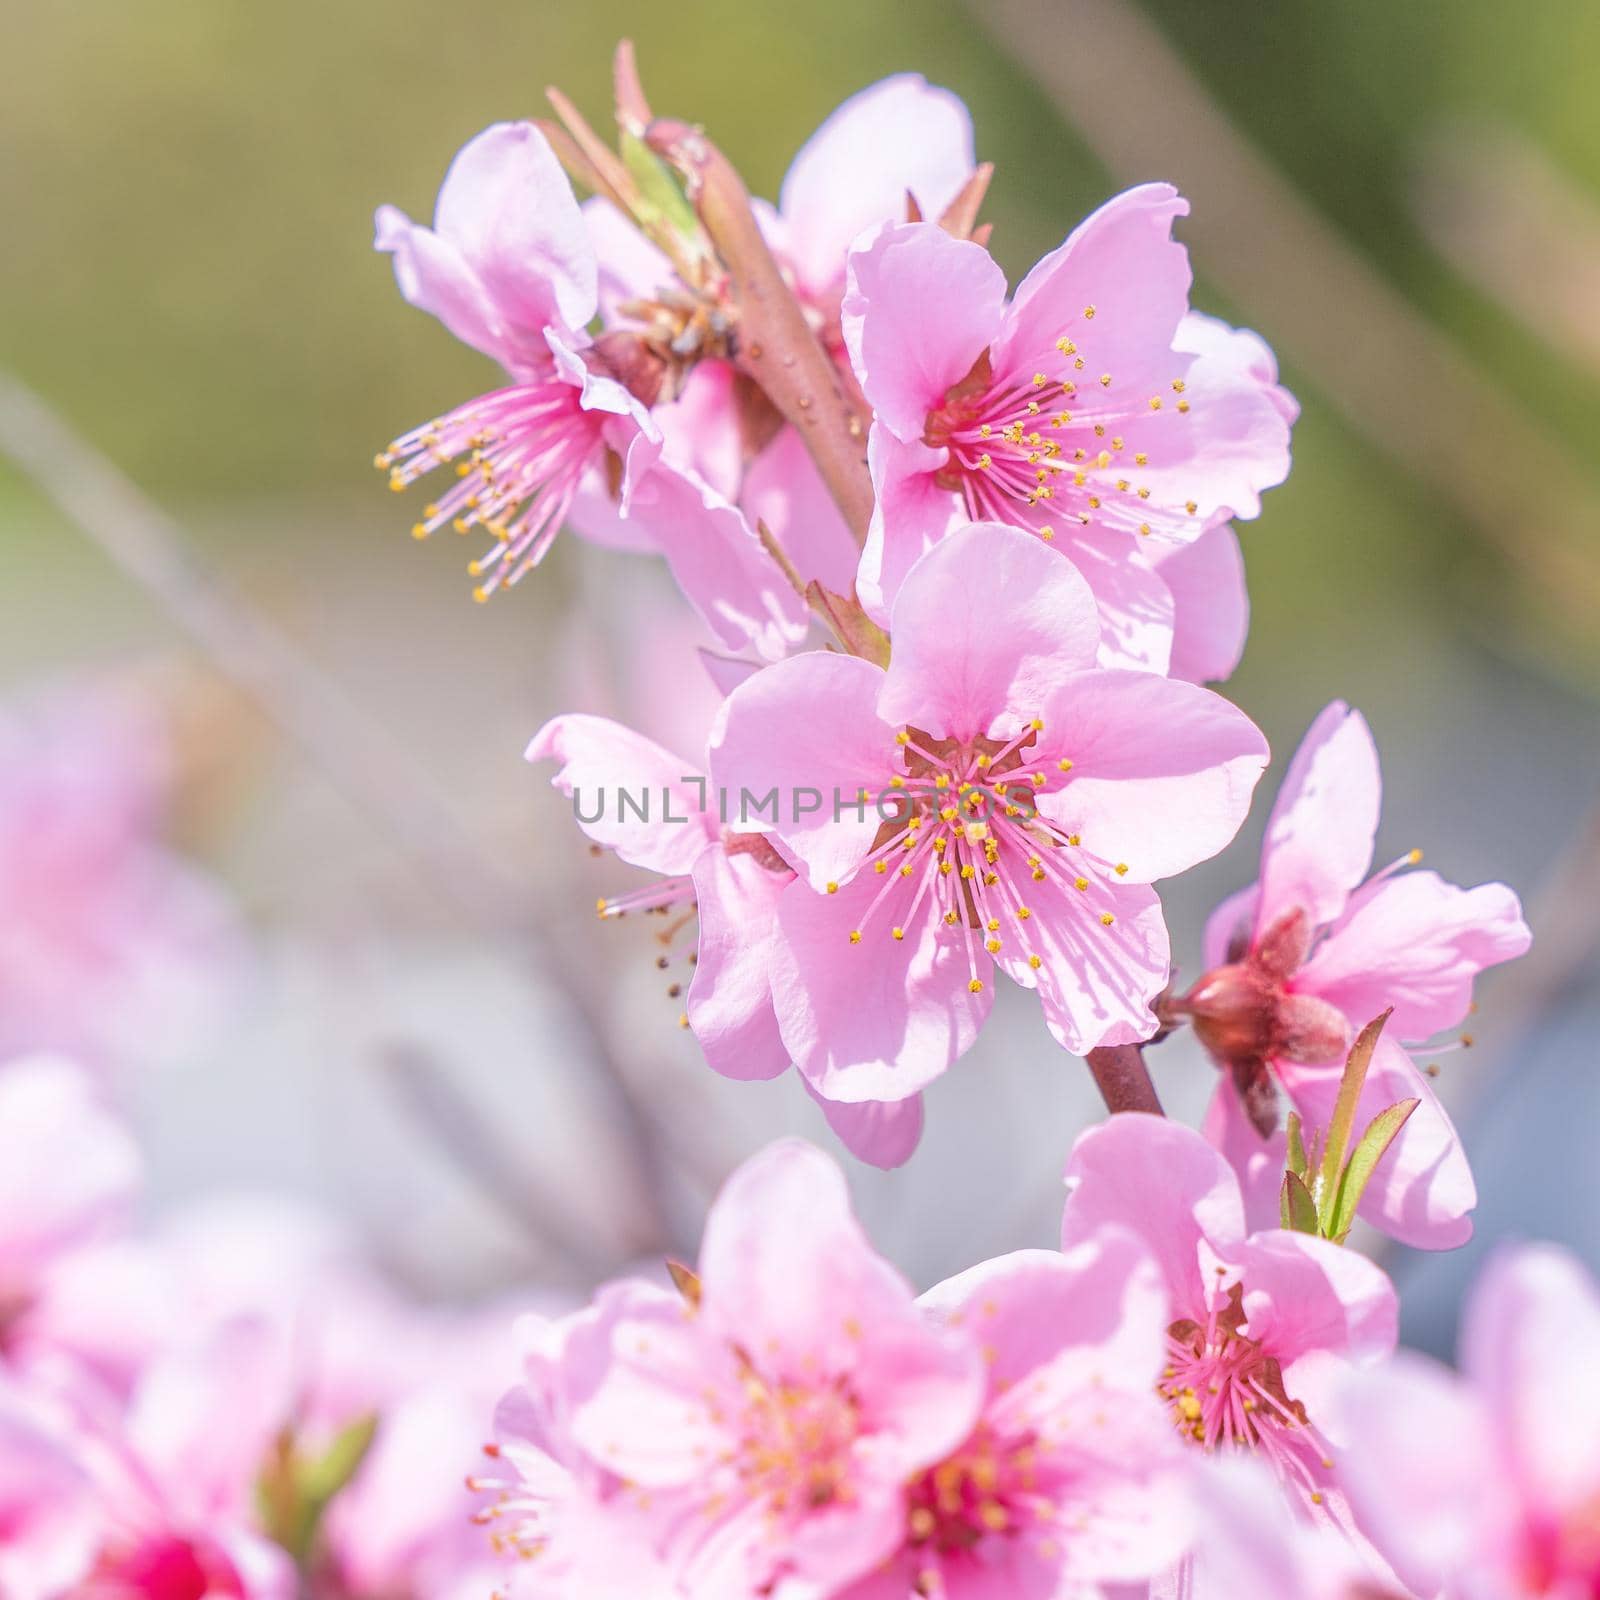 Beautiful and elegant pale light pink peach blossom flower on the tree branch at a public park garden in Spring, Japan. Blurred background.